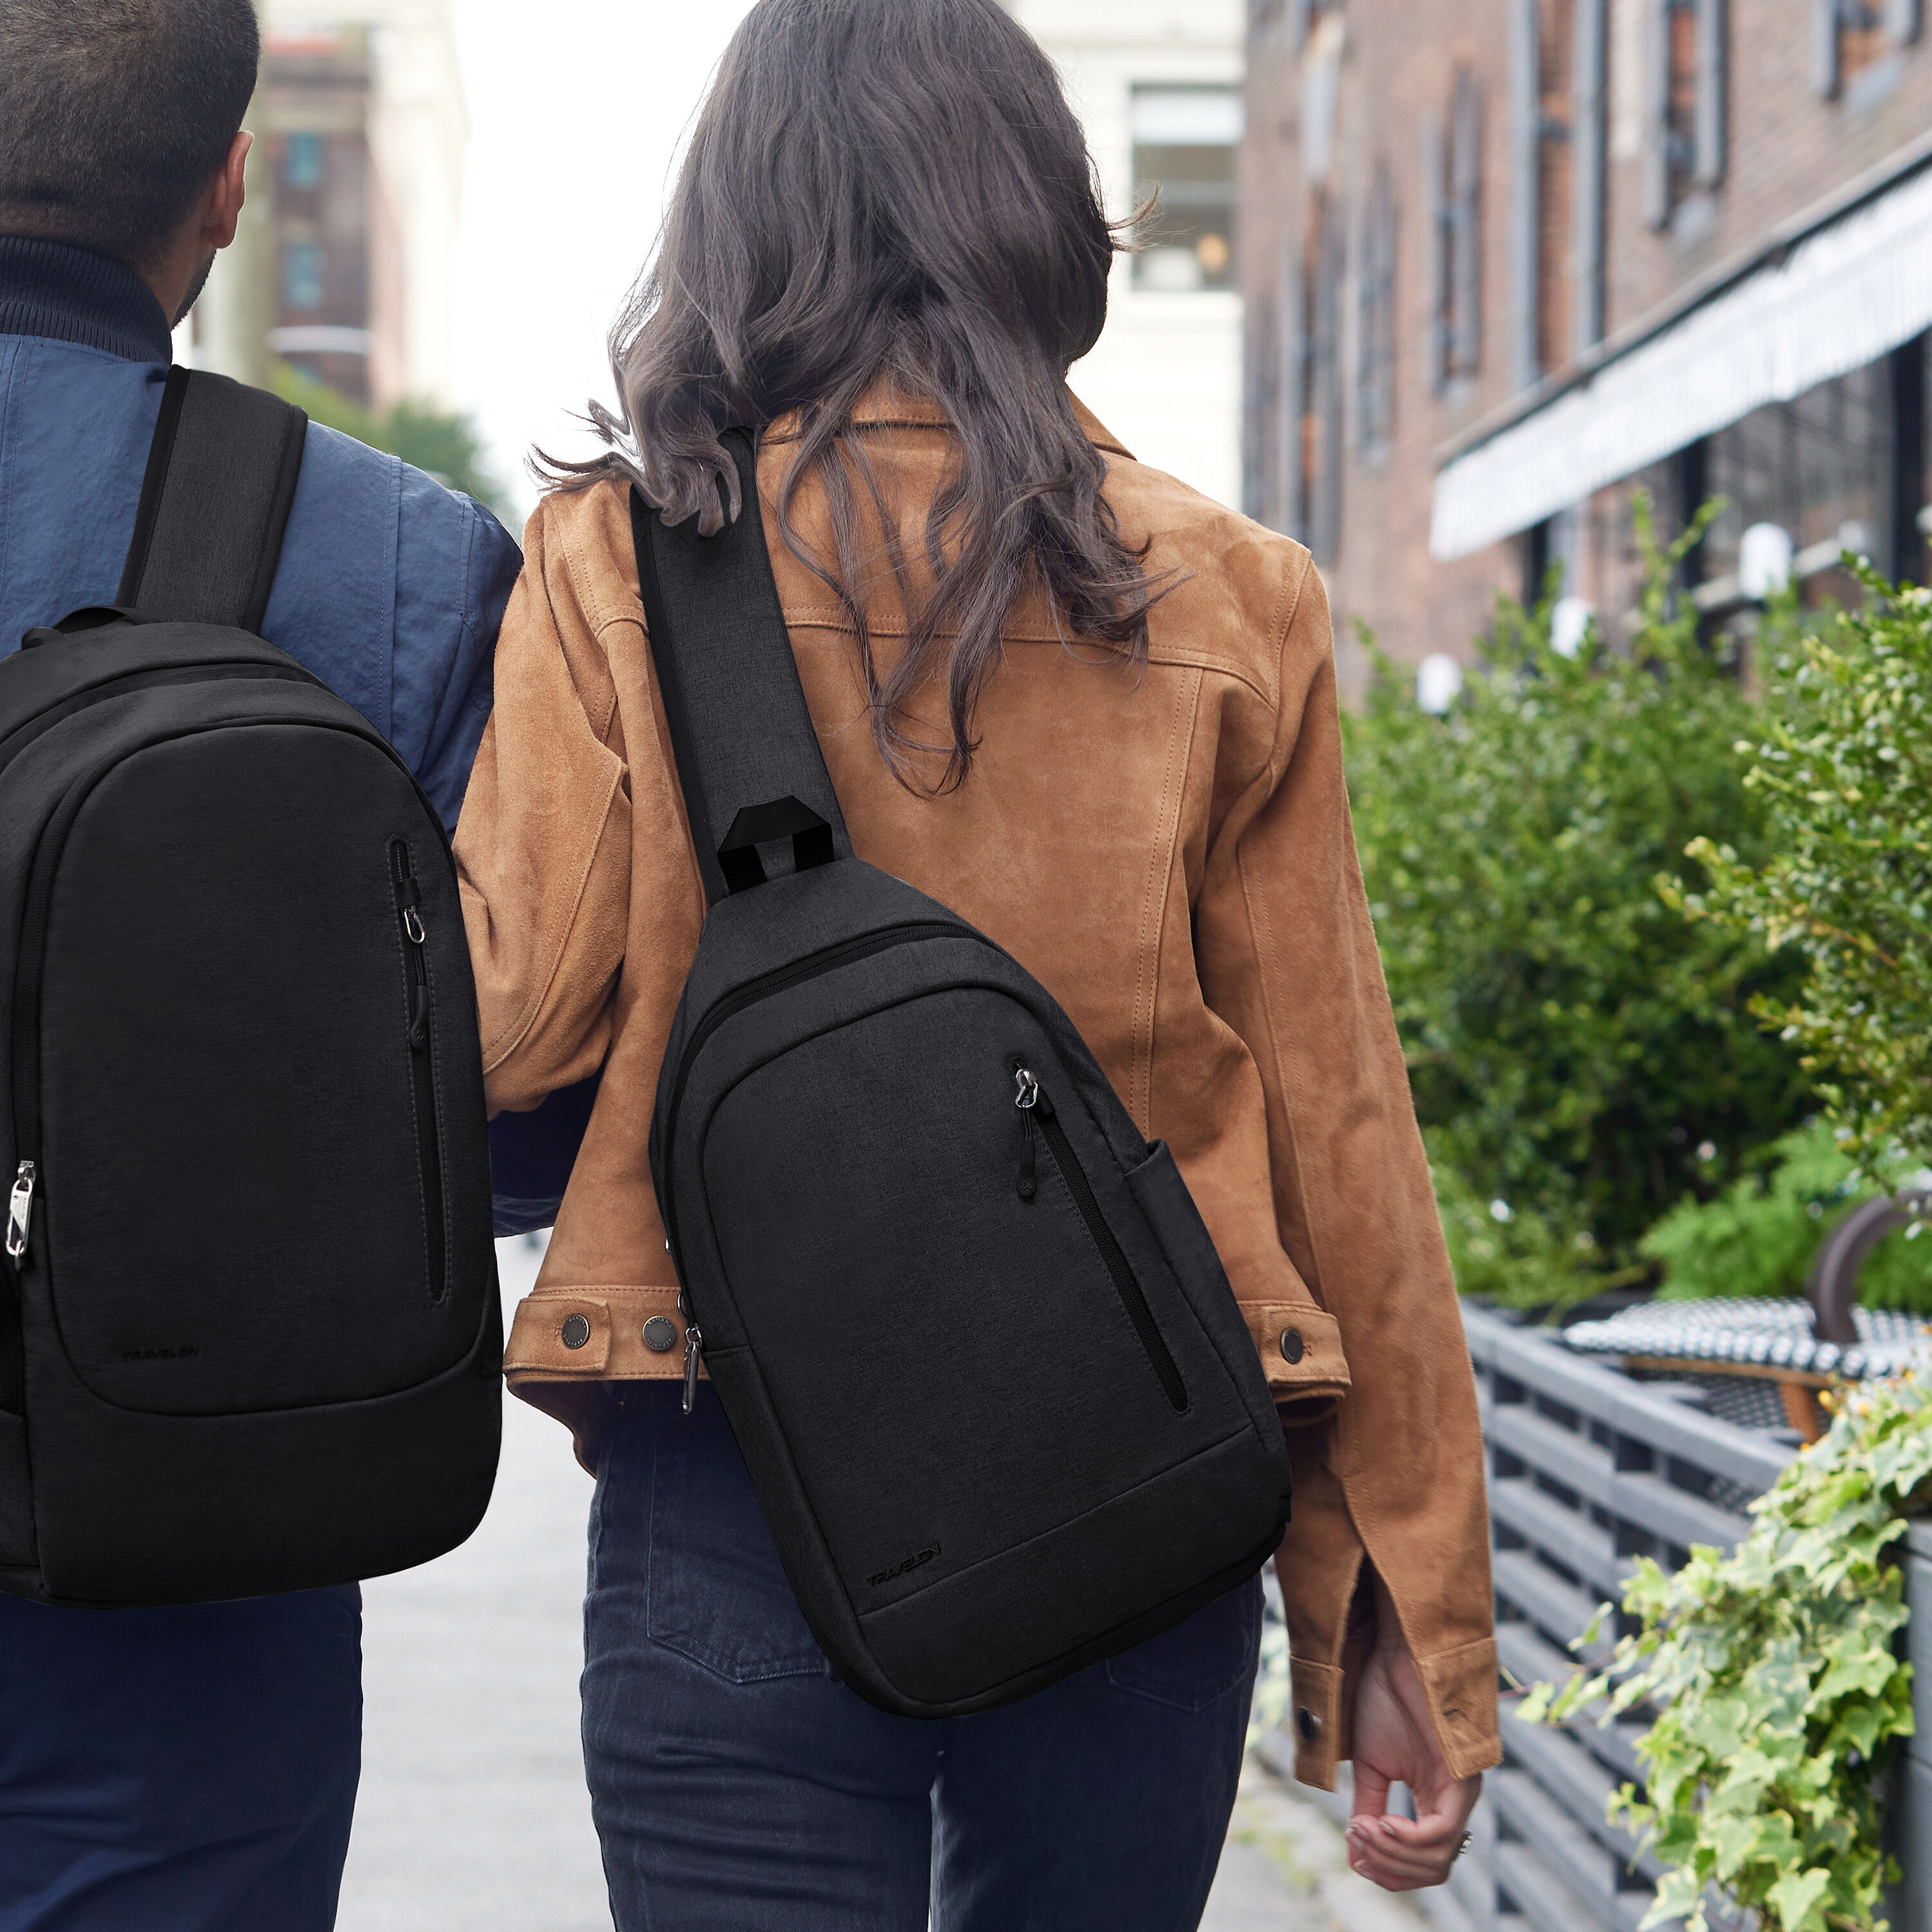 Bags and Backpacks | Travel Gear for Global Citizens – Solgaard